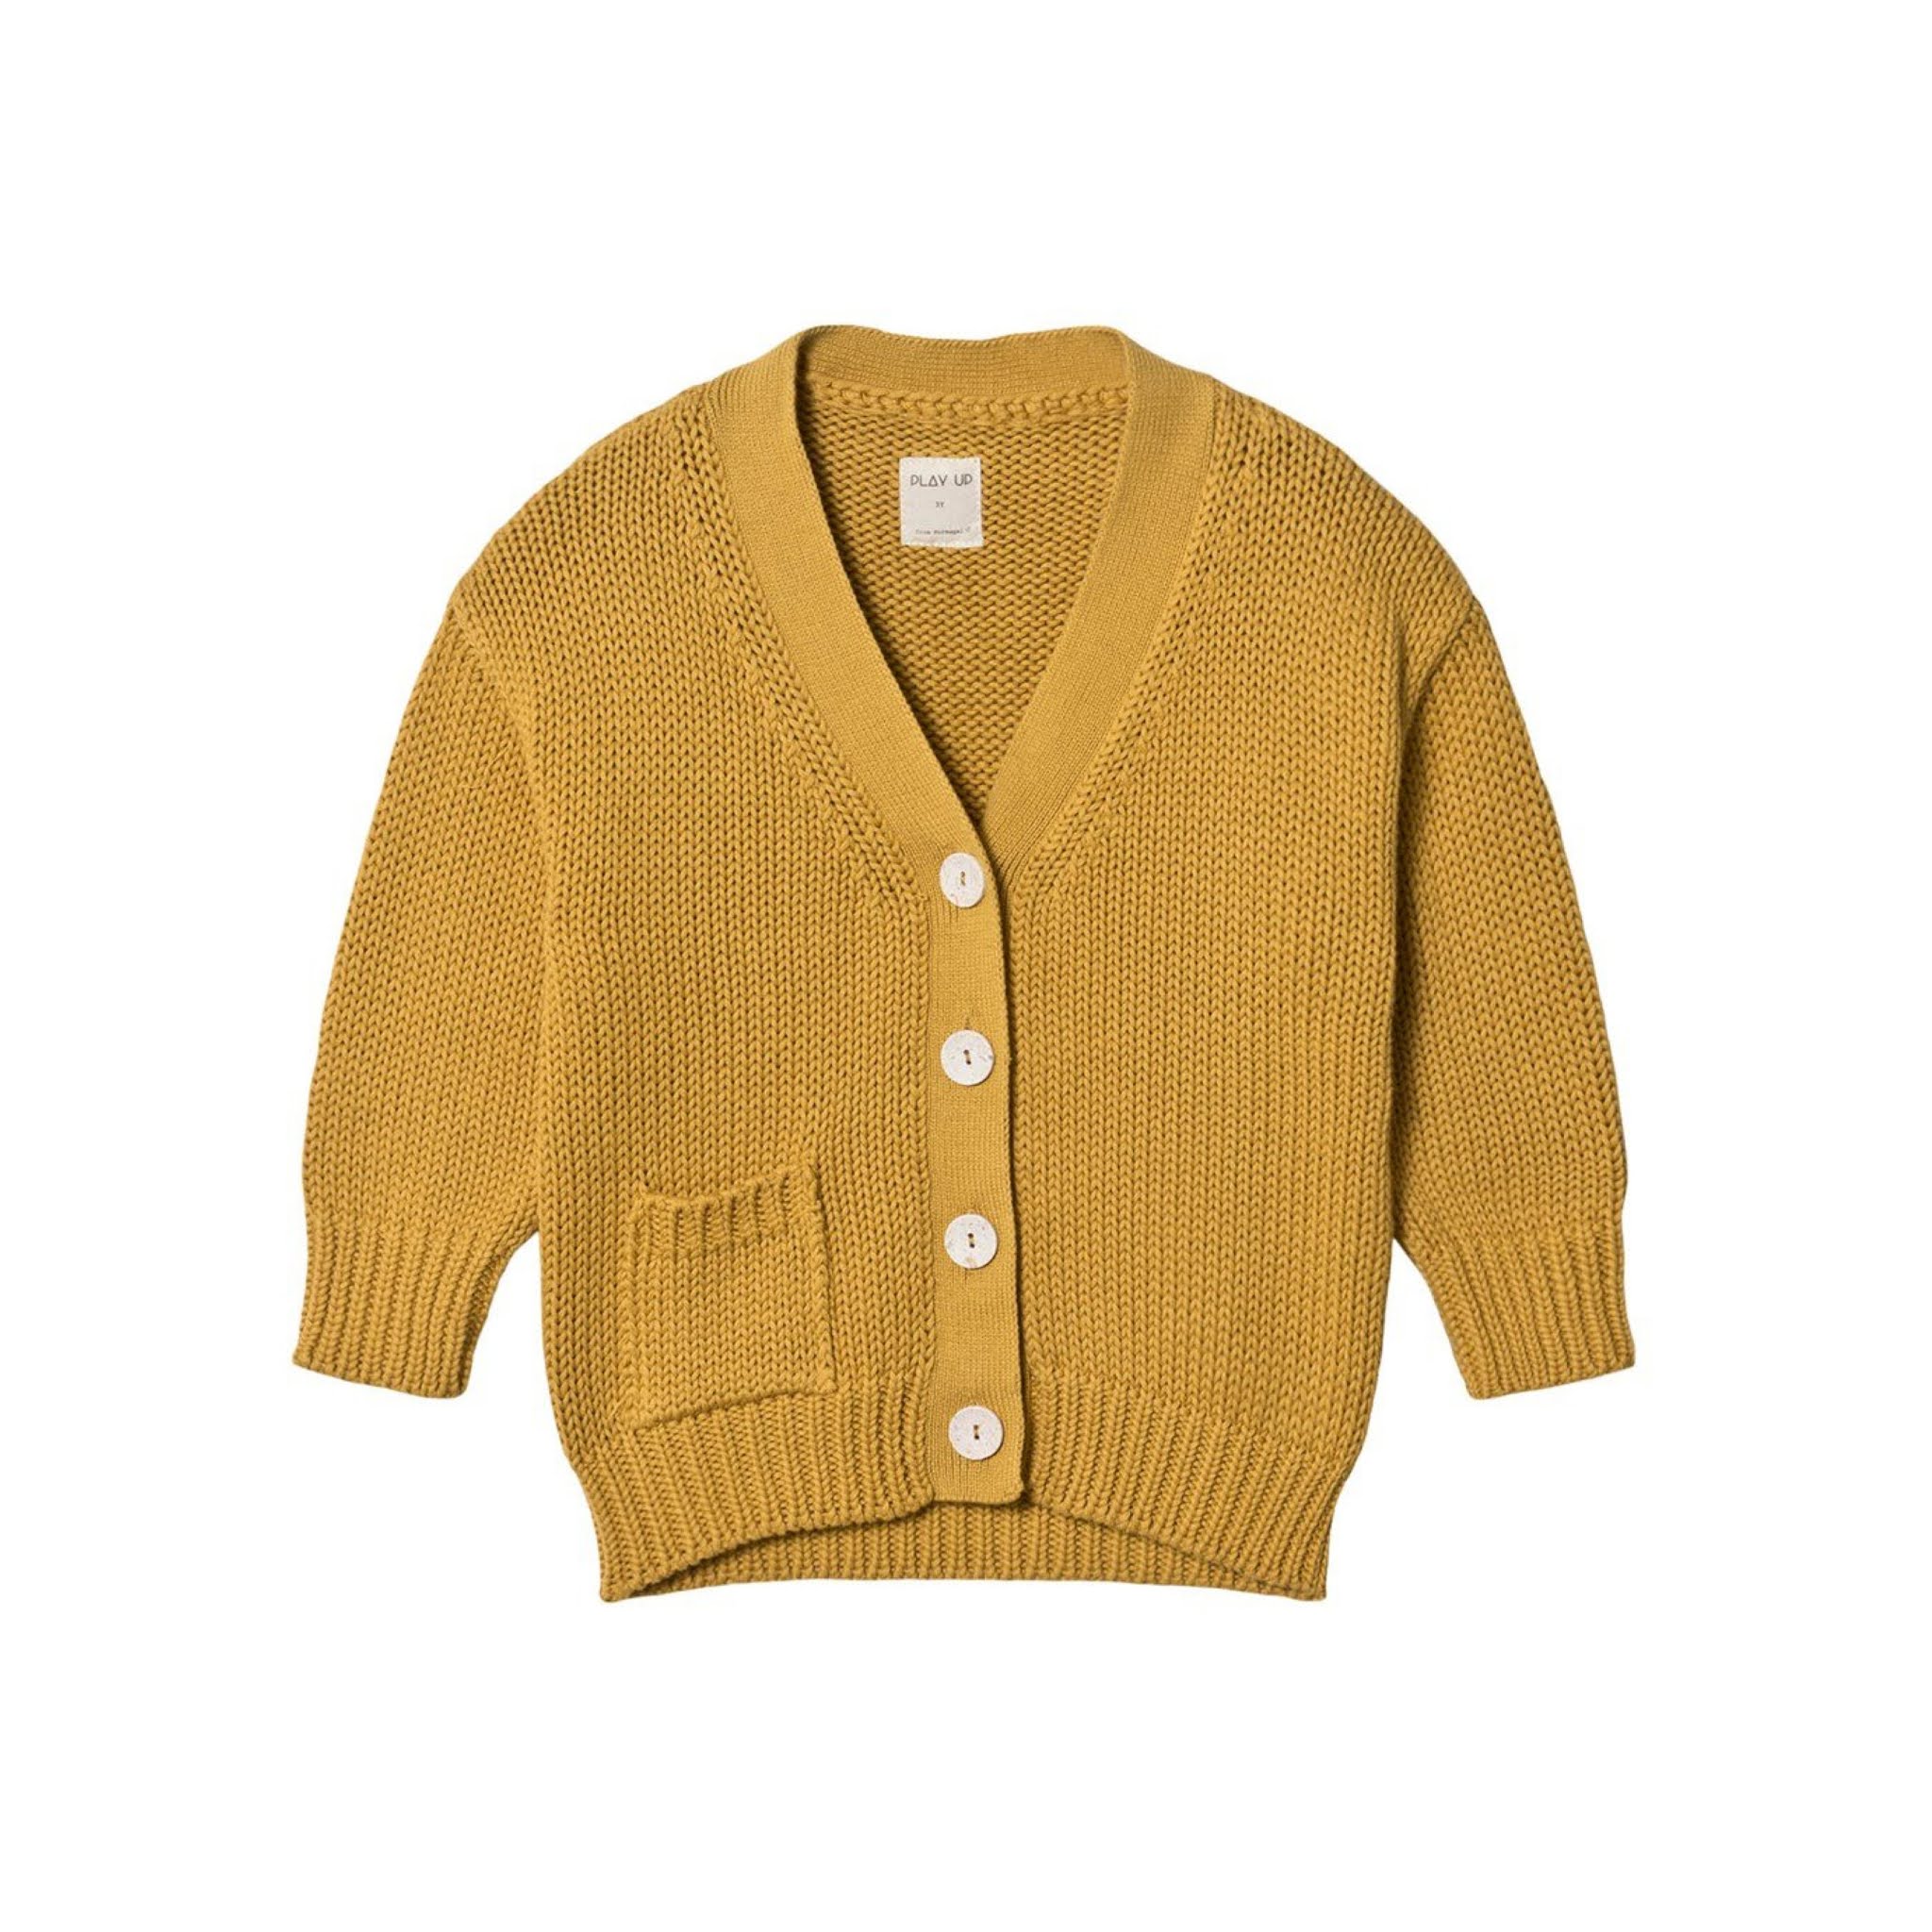 Kids Yellow Knit Cardigan from Play Up